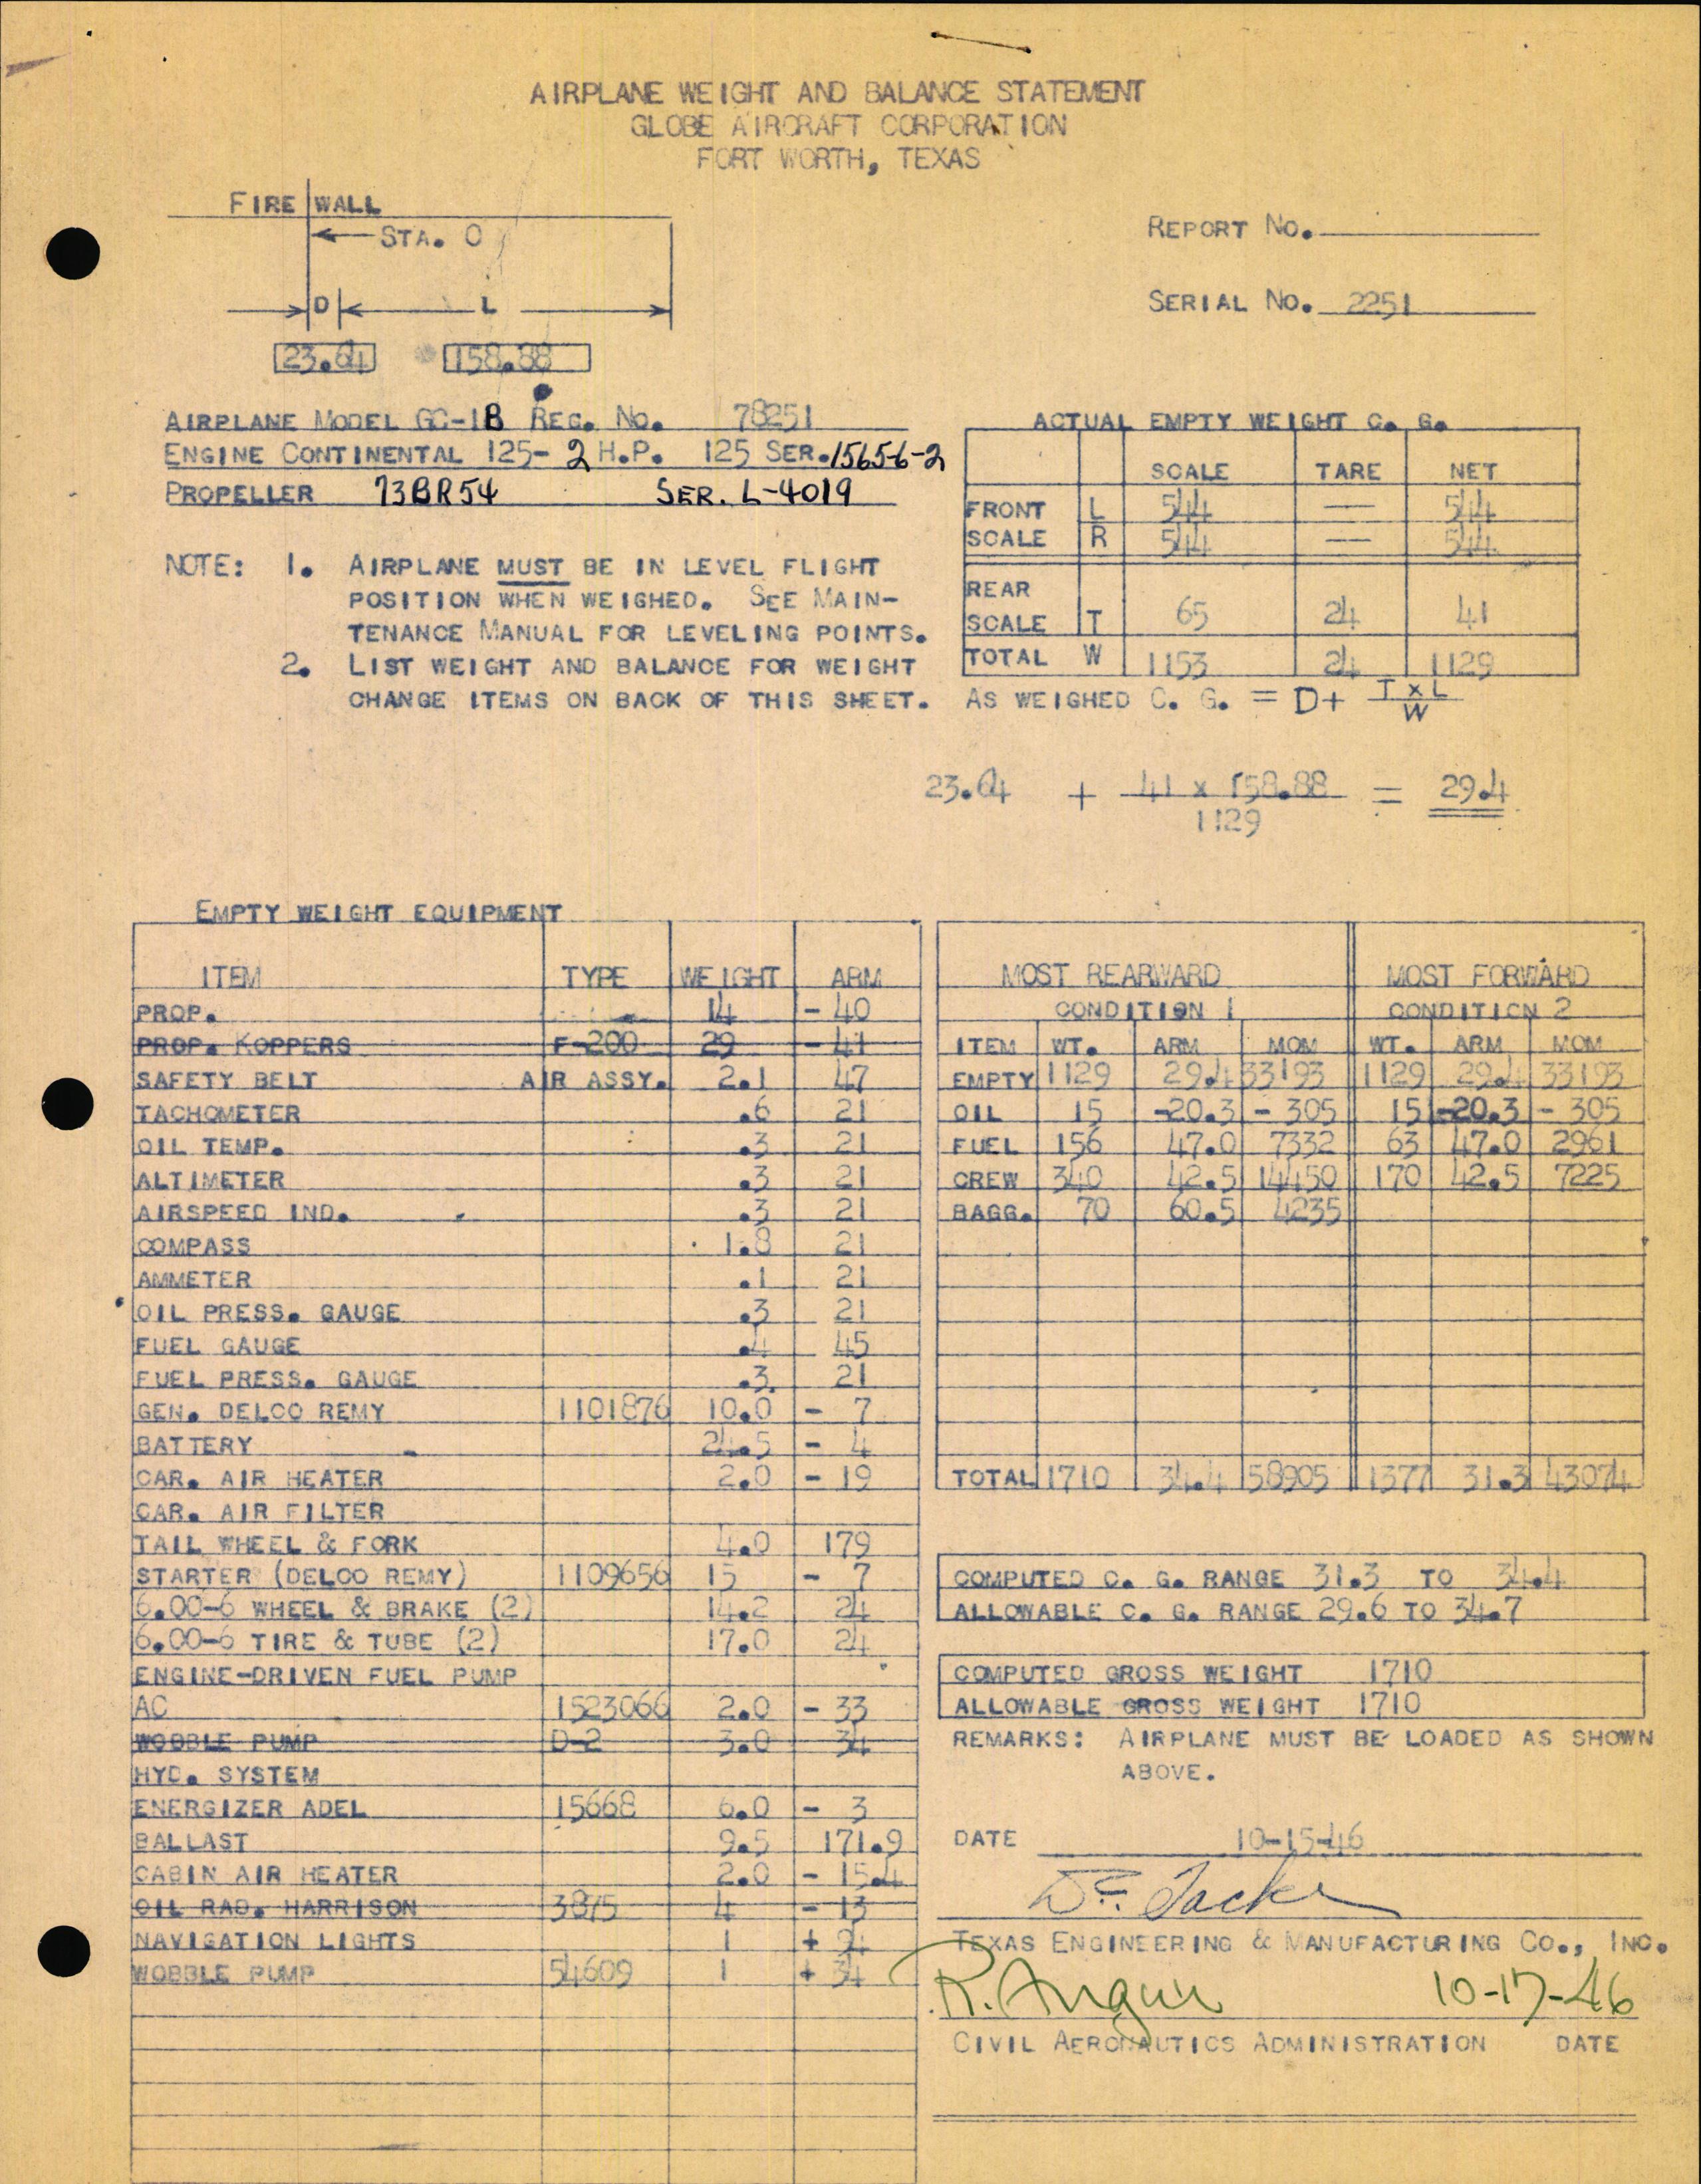 Sample page 1 from AirCorps Library document: Technical Information for Serial Number 2251